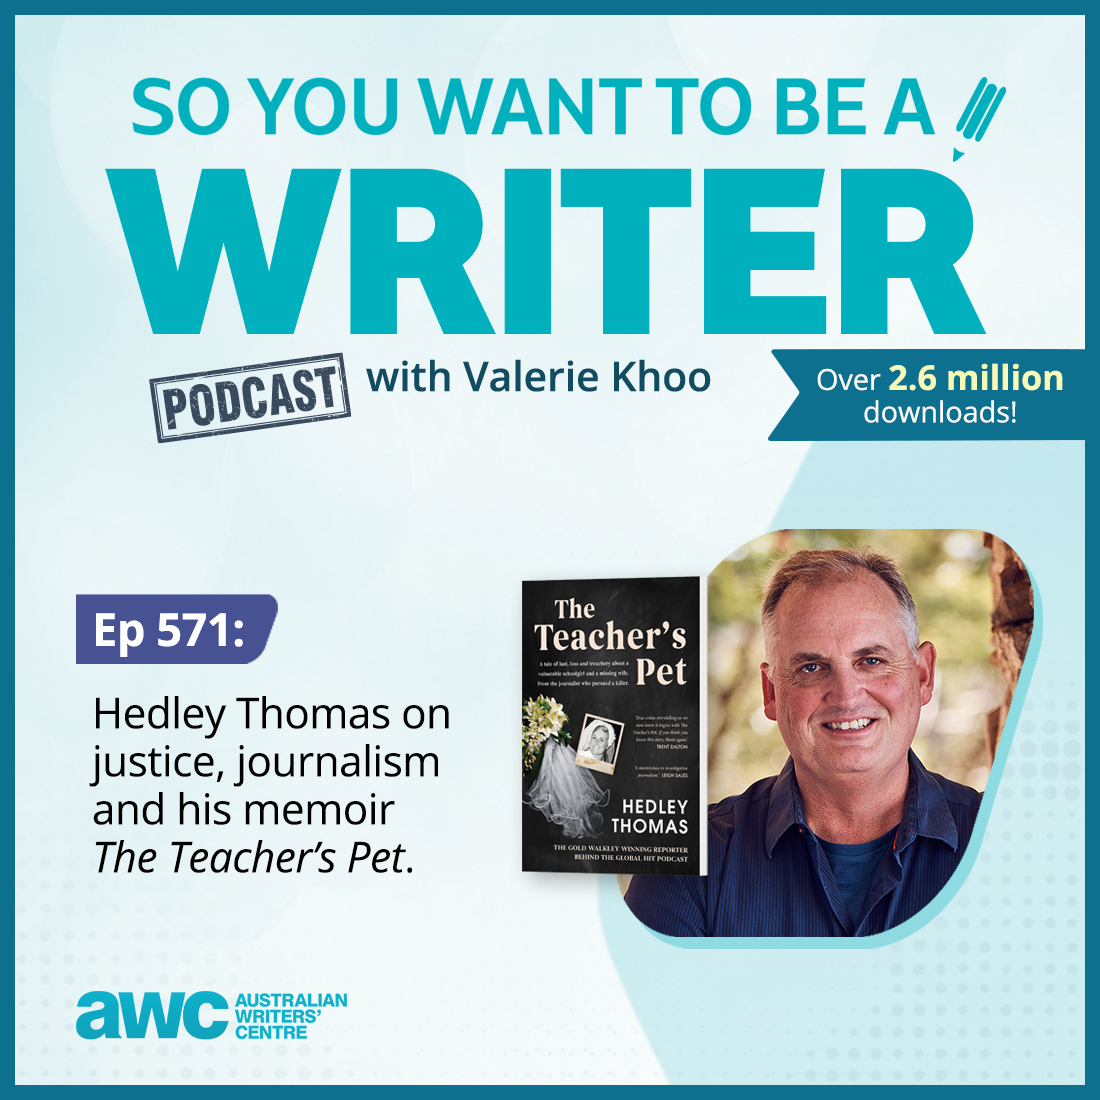 WRITER 571: Hedley Thomas on justice, journalism and his memoir ’The Teacher’s Pet’.